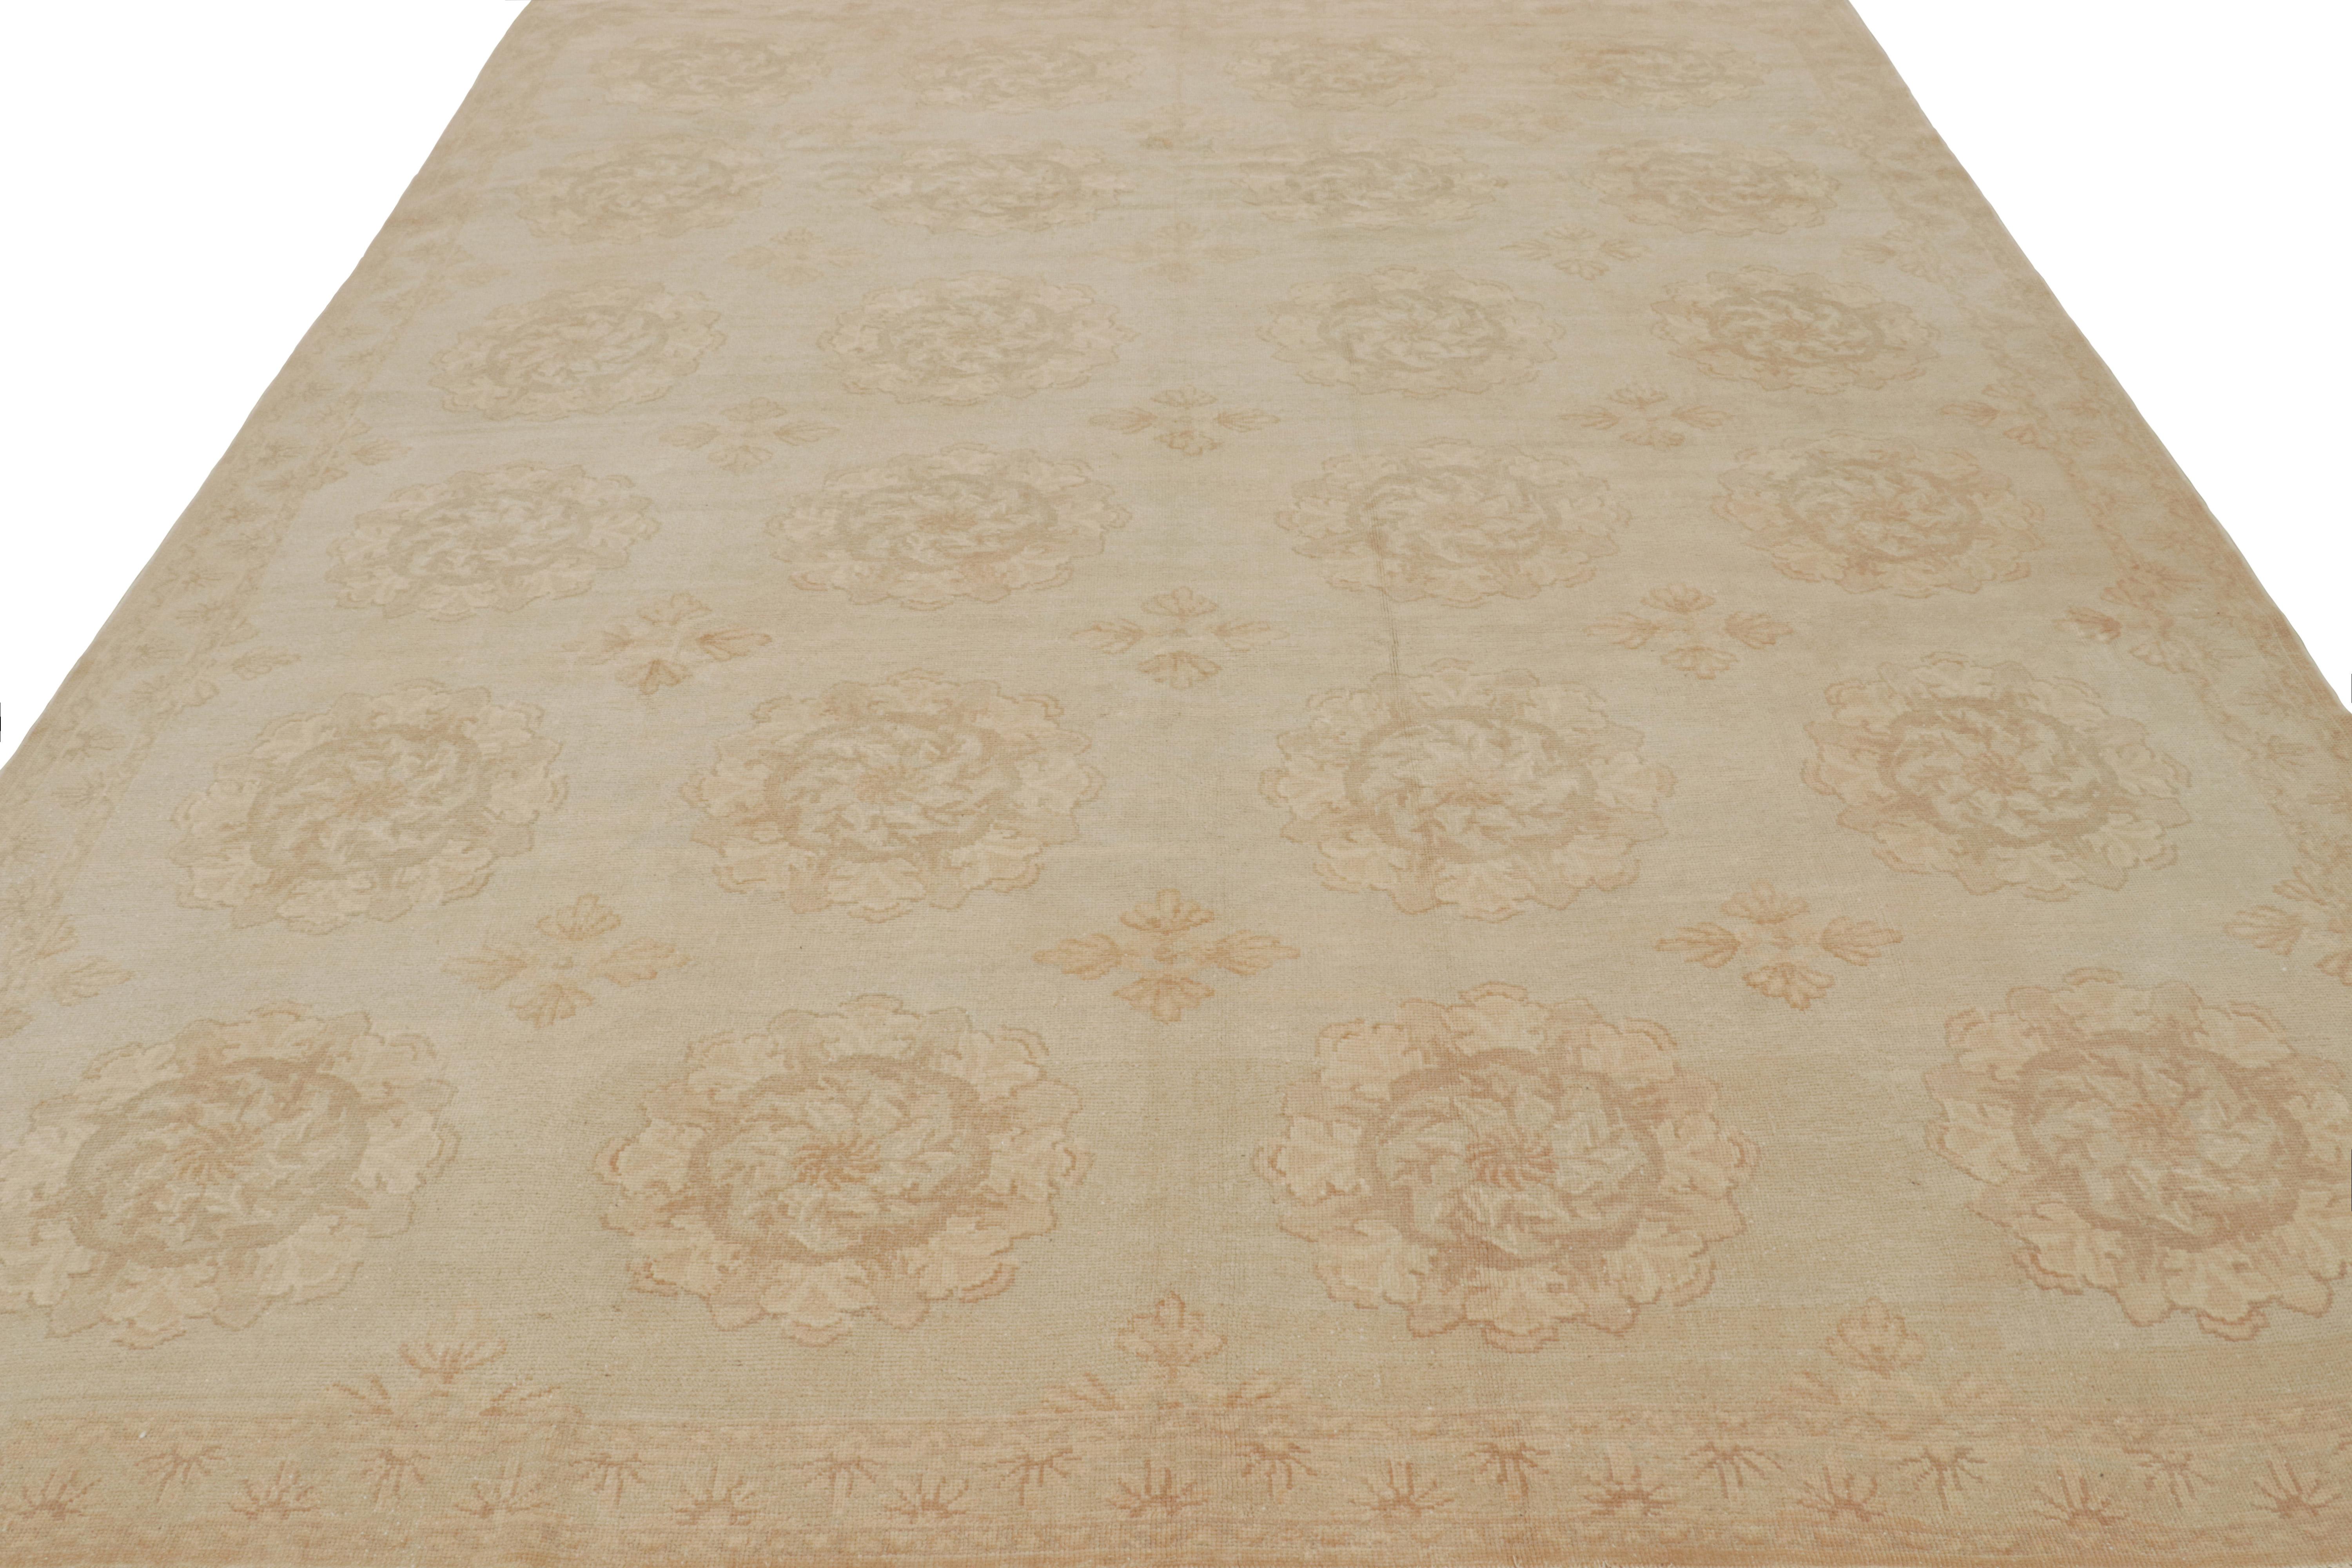 Aubusson Rug & Kilim’s Contemporary European Style Rug with Beige-Brown Floral Medallions For Sale